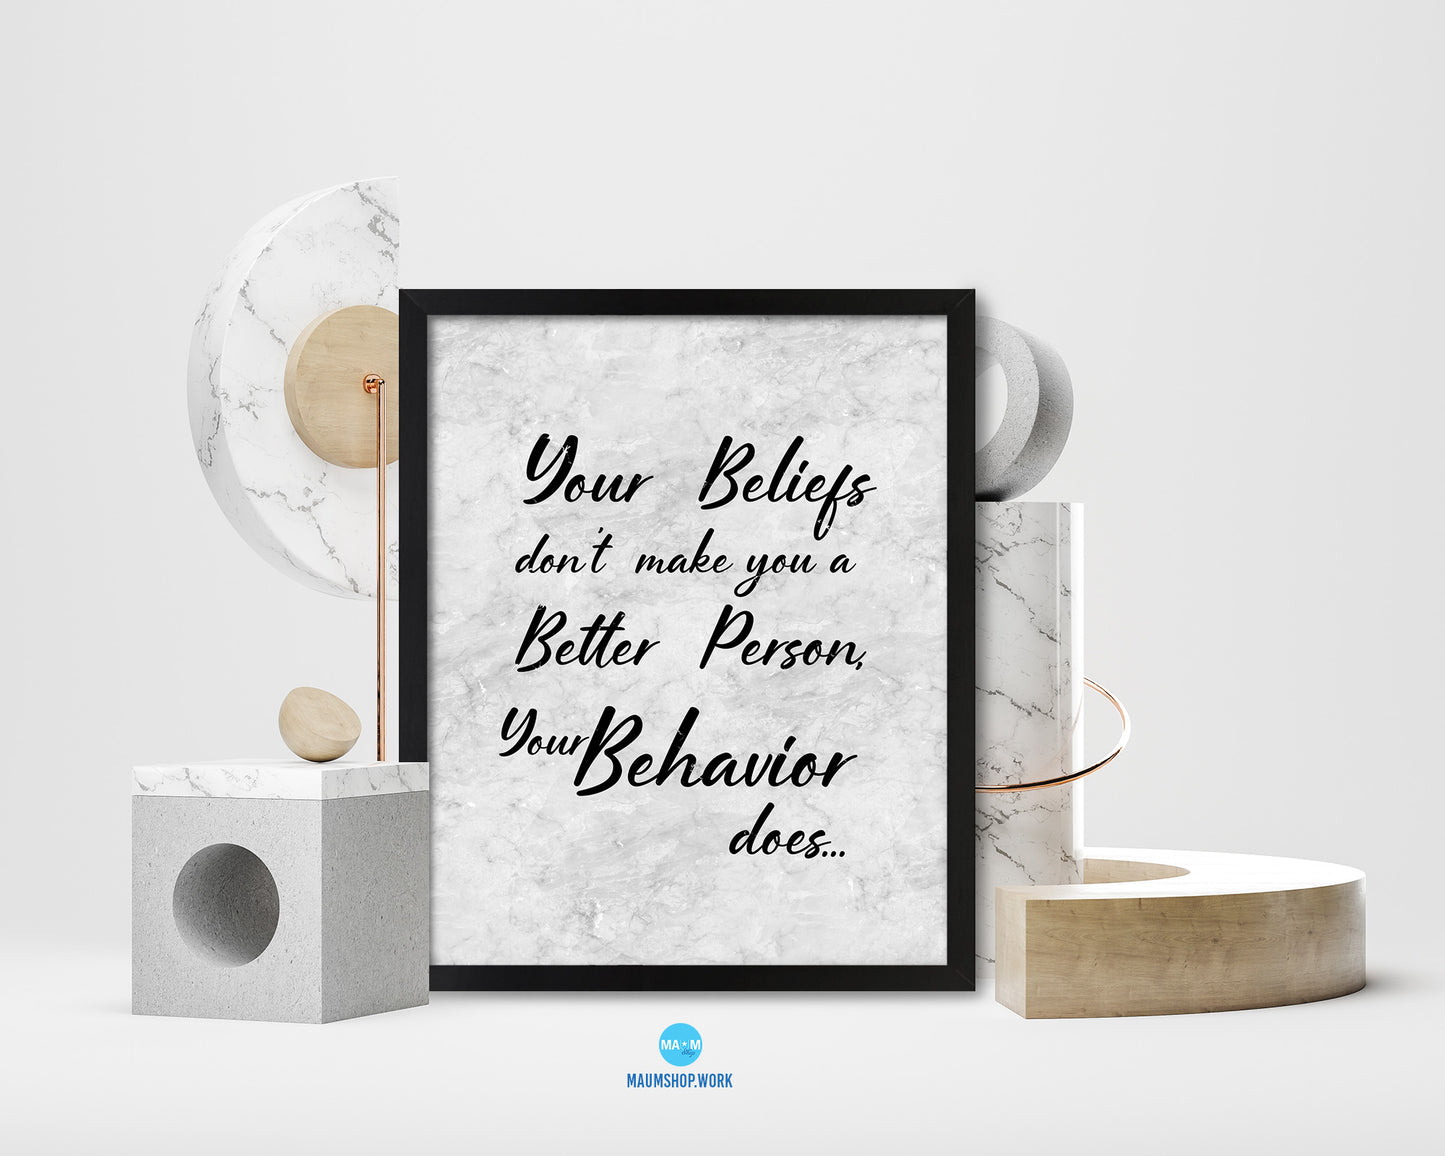 Your beliefs don't make you a better person Quote Framed Print Wall Art Decor Gifts